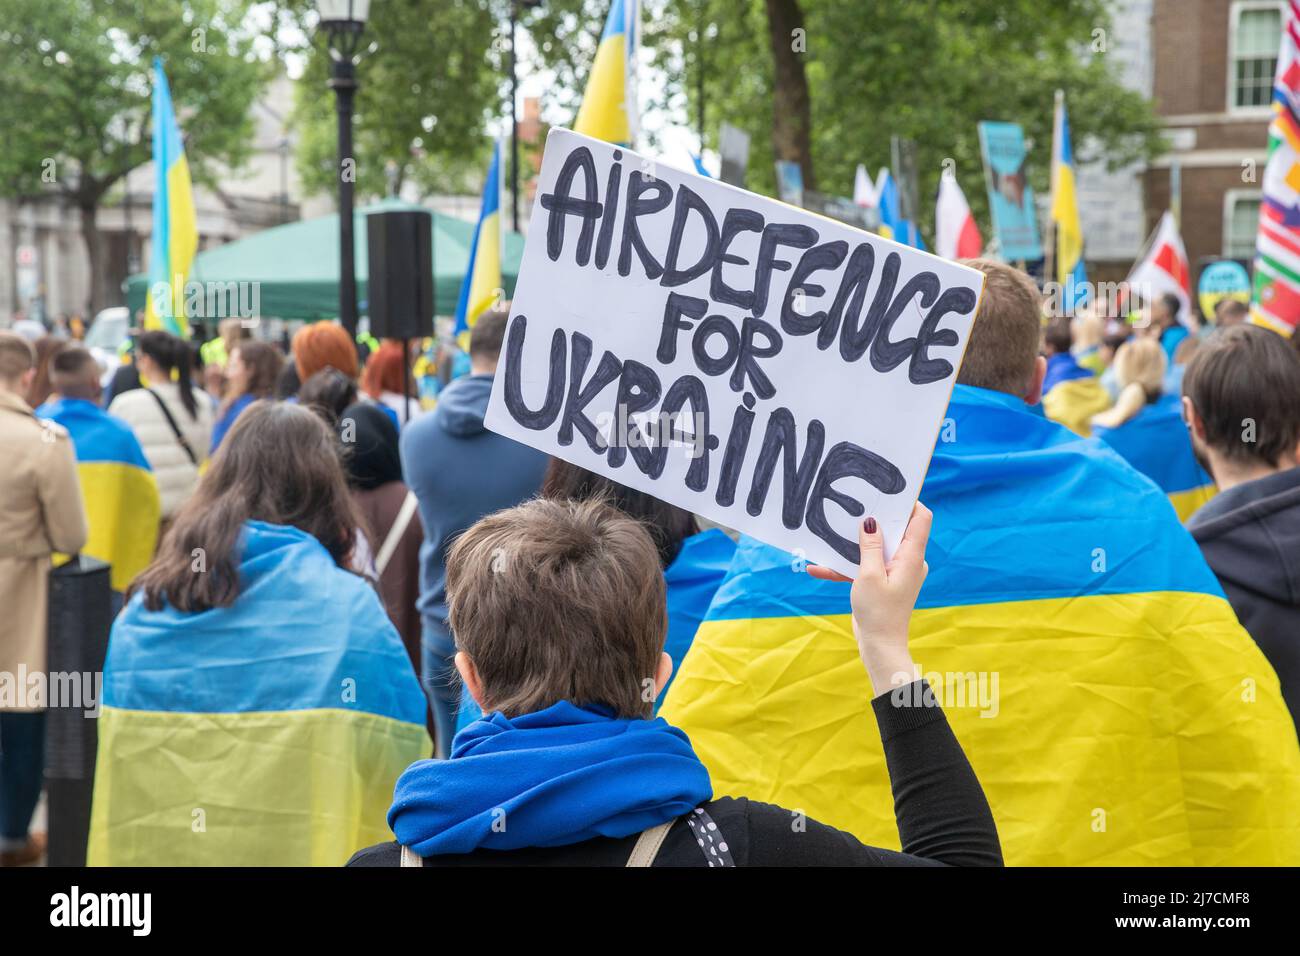 Women Holds Sign Calling for Air Defence for Ukraine during protest in London Stock Photo